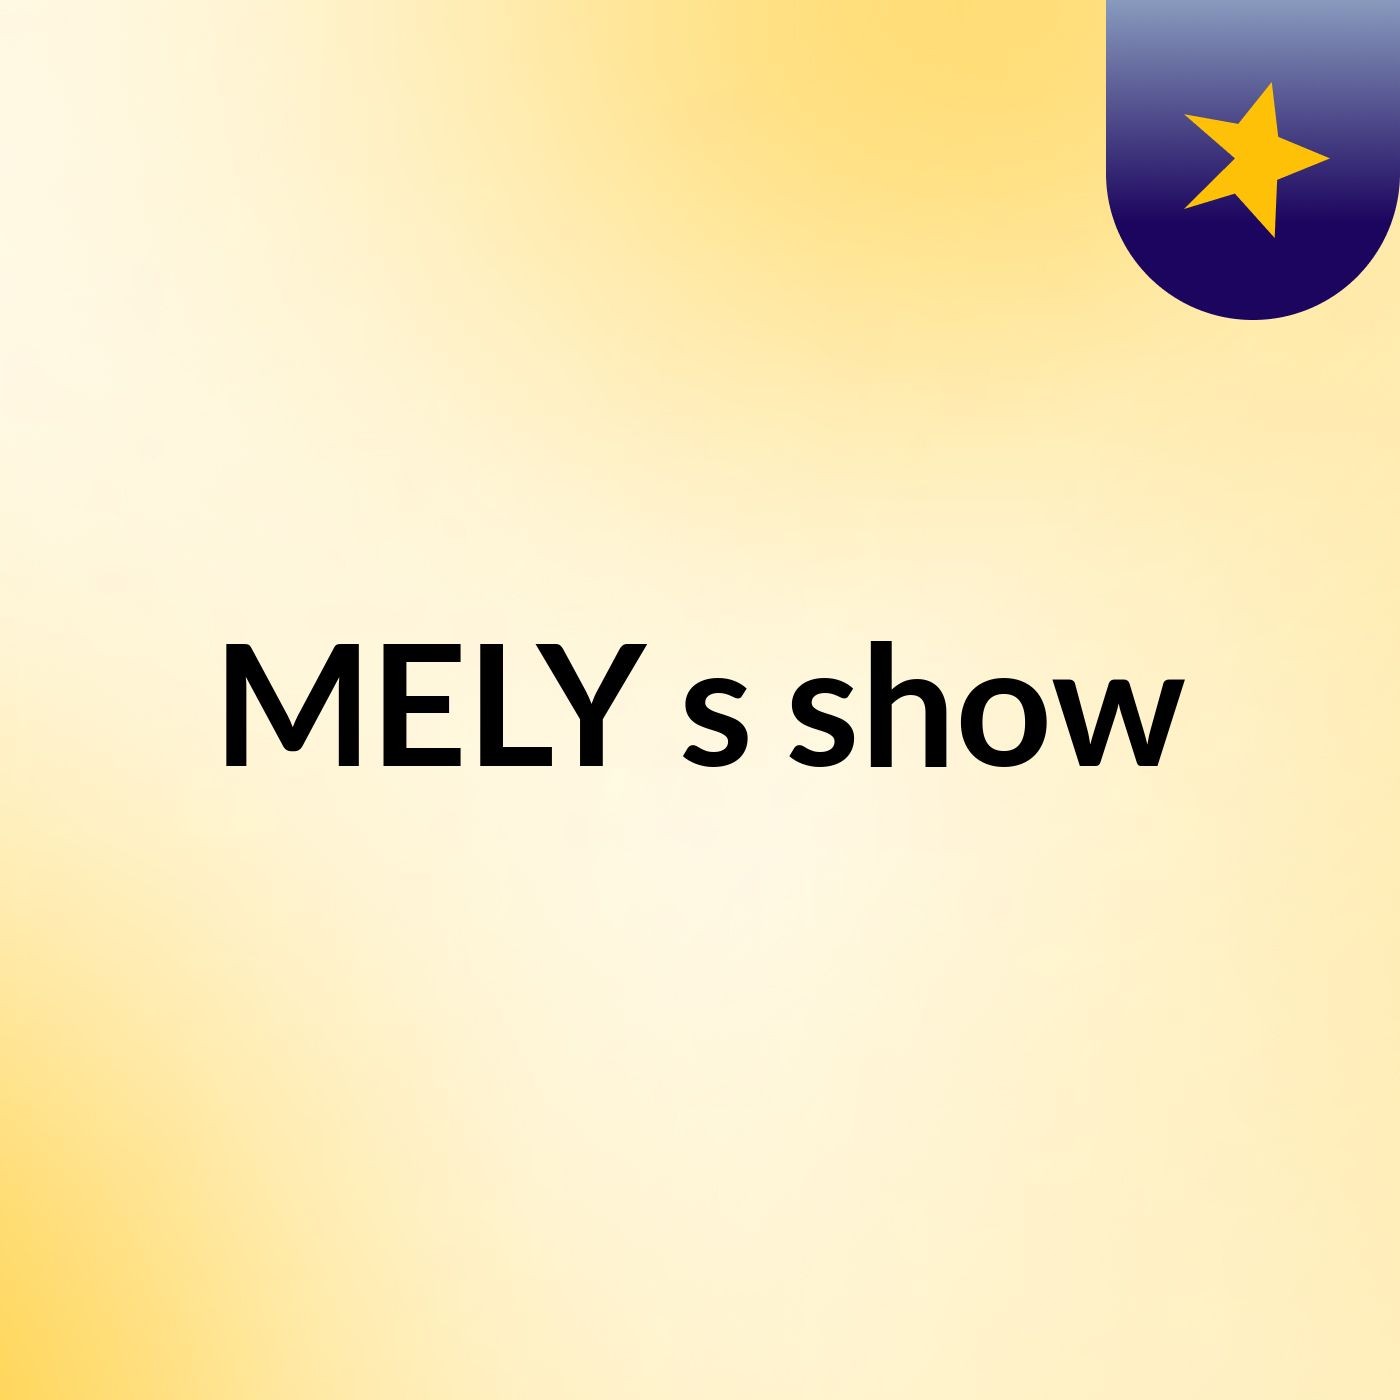 MELY's show